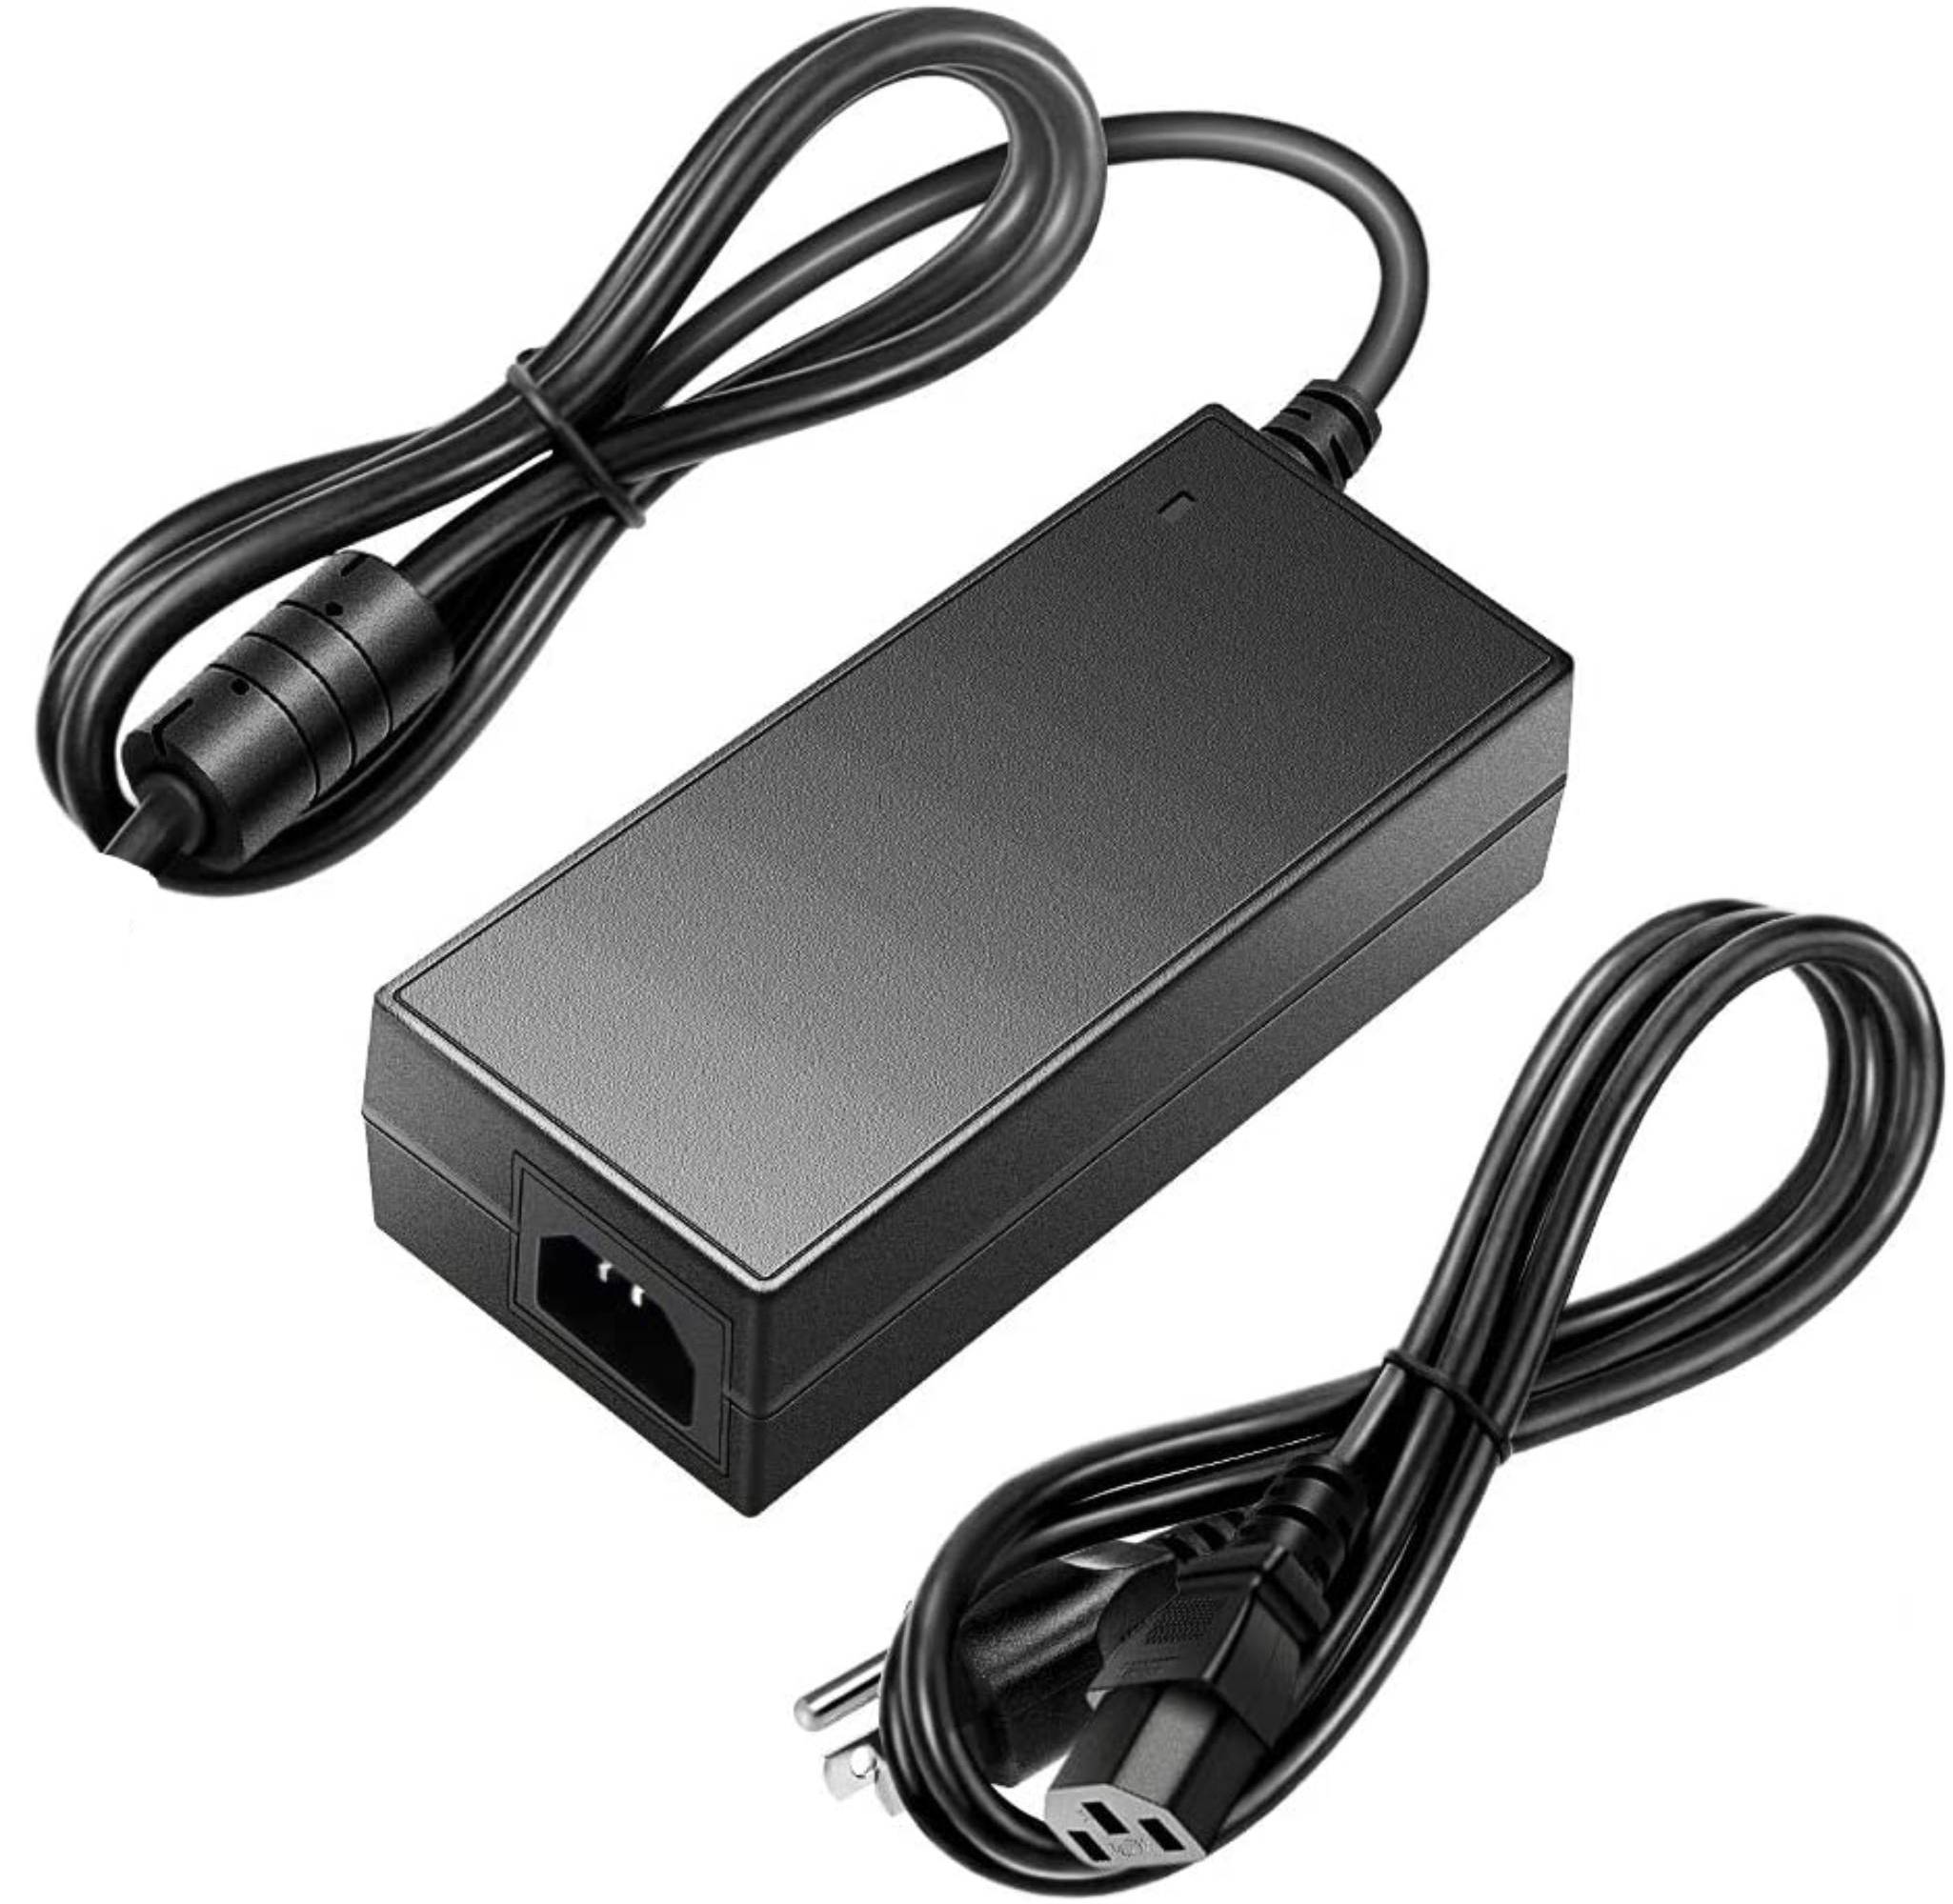 Omilik AC Adapter replacement compatible with JBL XTREMEBLKUS JBL XTREME2BLKAM JBL XTREME2BLUAM JBL XTREME2GRNAM JBL BY HARMAN P/N: NSA60ED-190300 KCC-REM-JQH-NSA60ED-190300 NSA60ED190300 - image 1 of 3